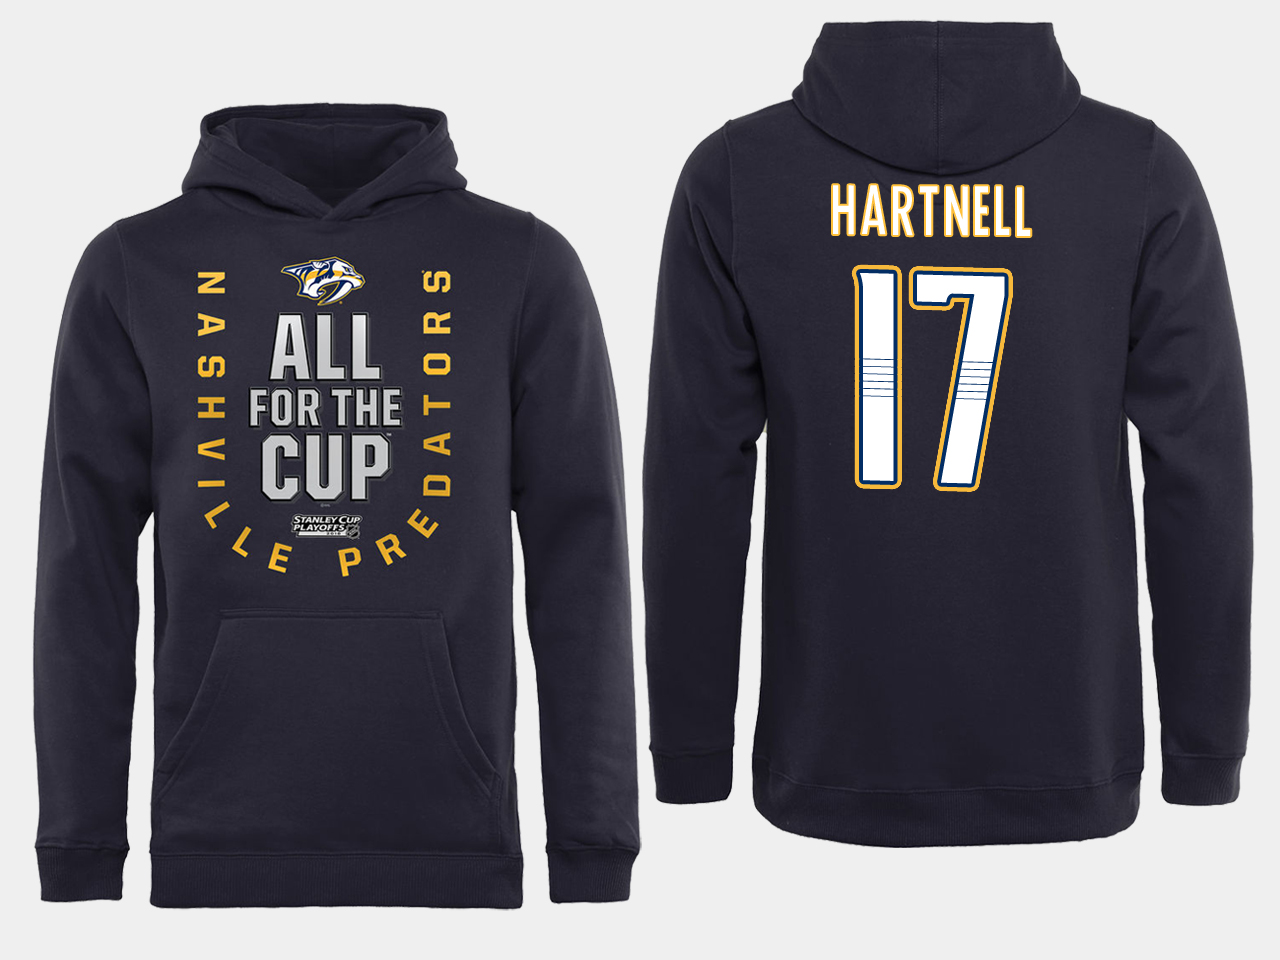 Men NHL Adidas Nashville Predators #17 Hartnell black ALL for the Cup hoodie->youth mlb jersey->Youth Jersey